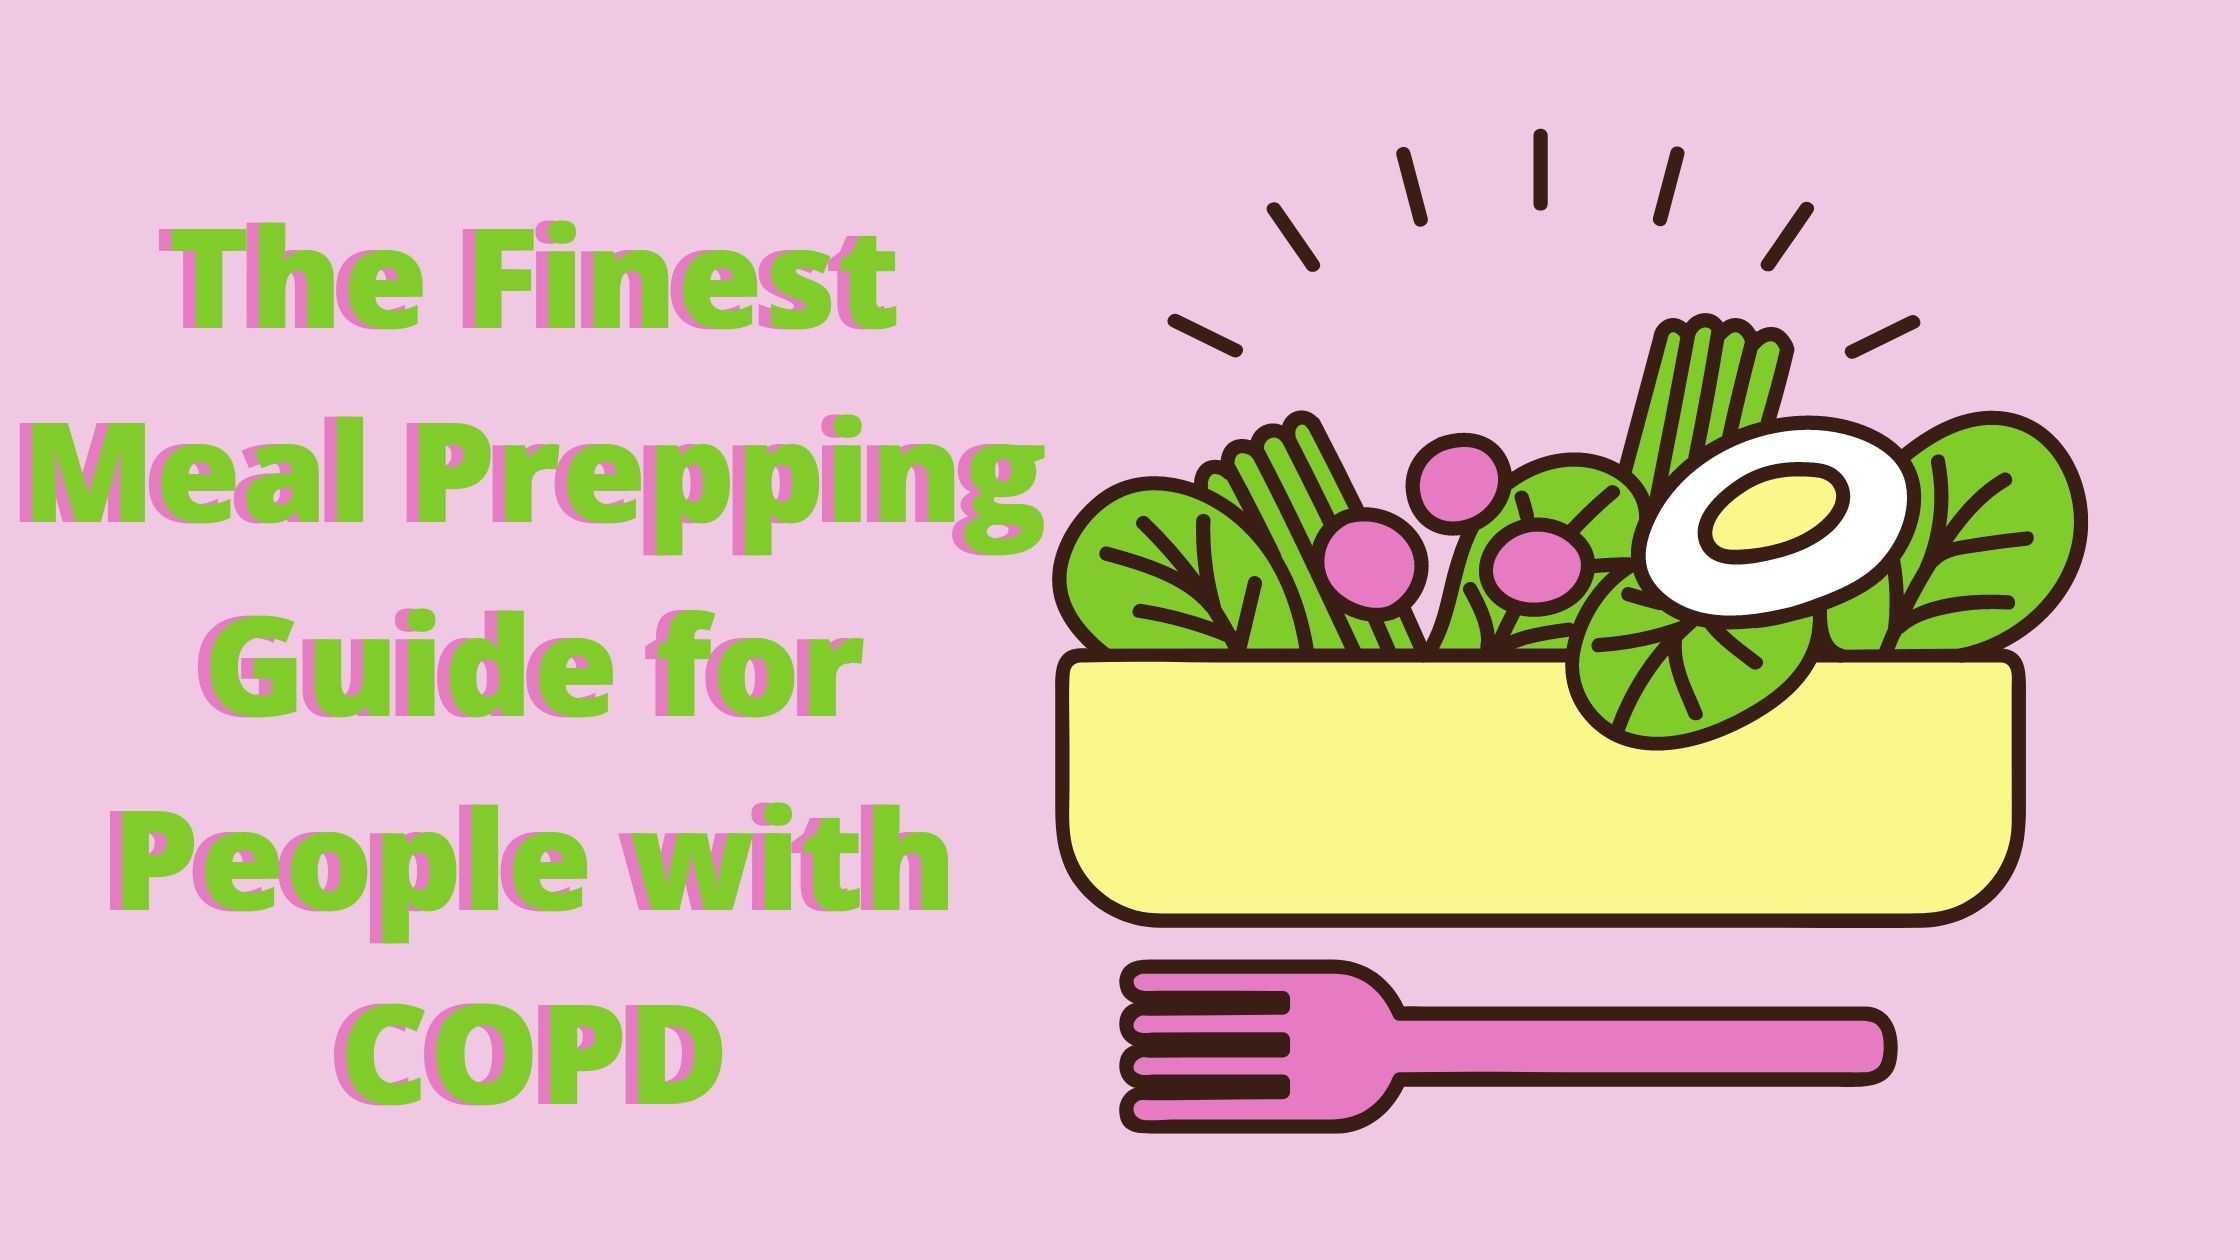 The Finest Meal Prepping Guide for People with COPD